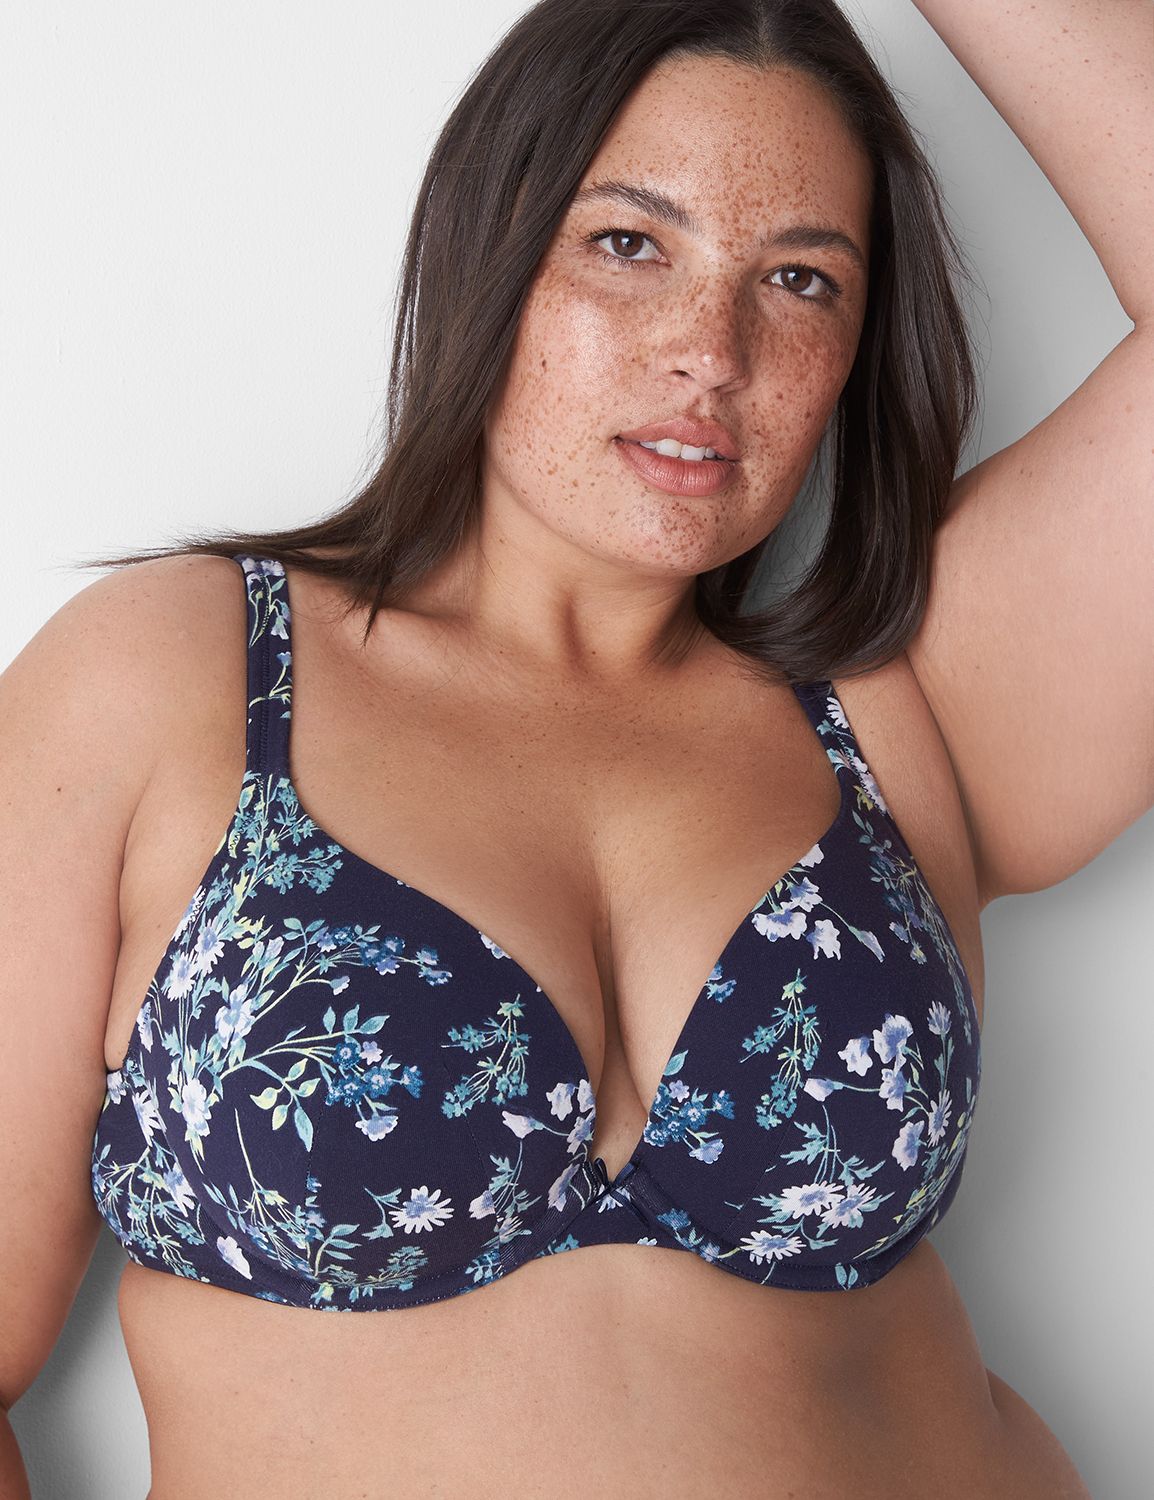 Off the Rack ~ Reviewing The Natural “Plus Size Sexy Plunge Bra